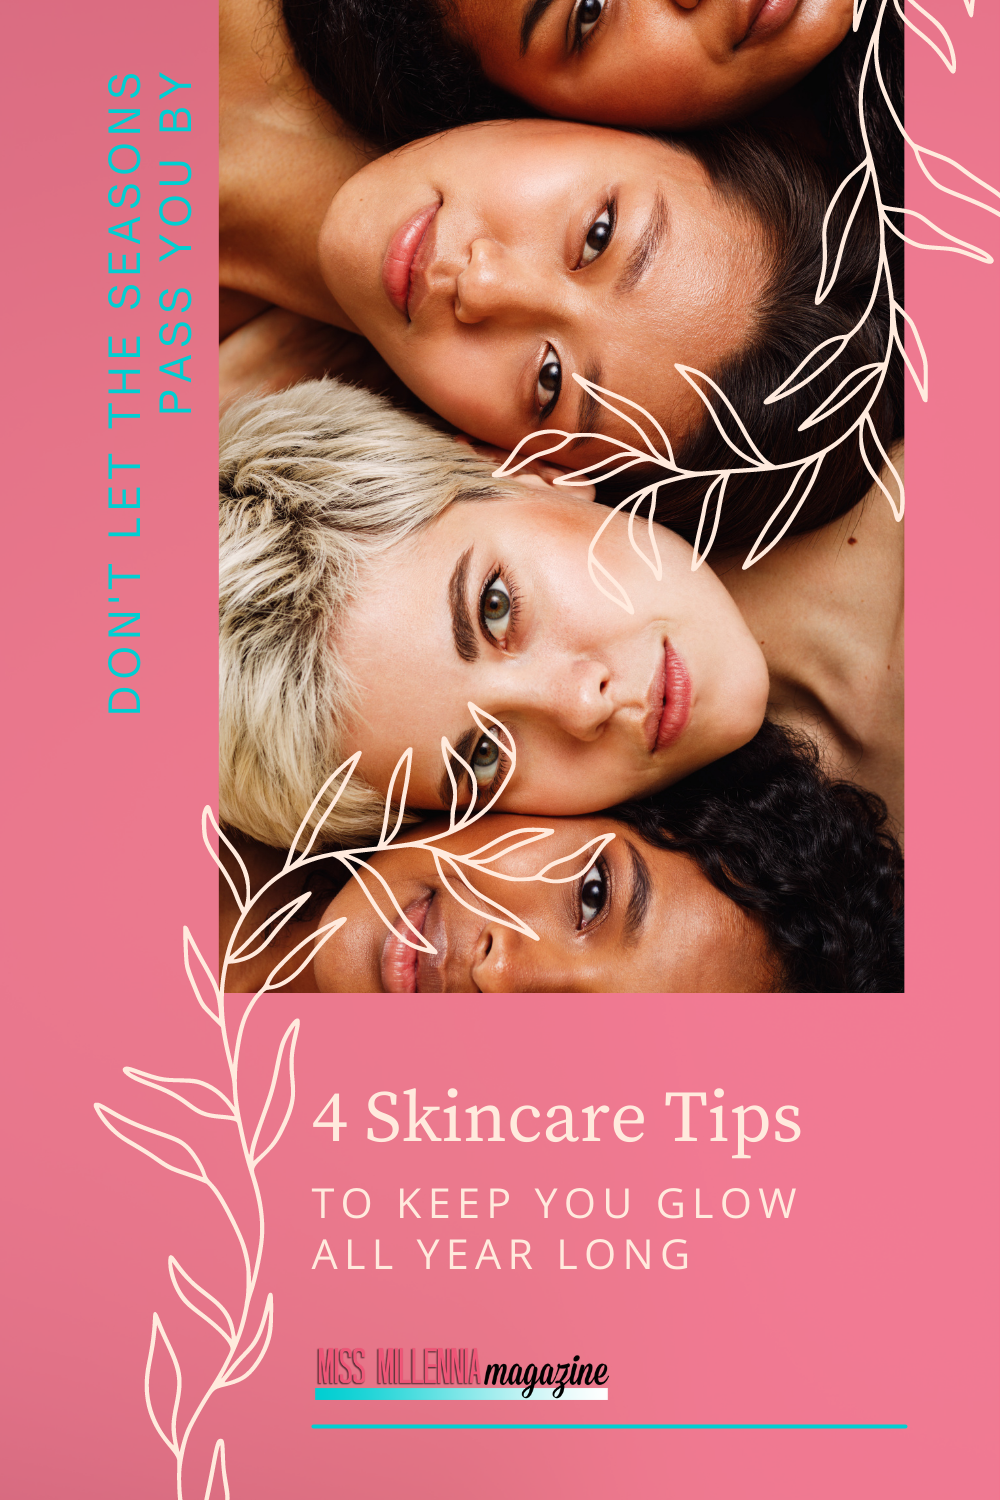 4 Skincare Tips to Keep You Glow All Year Long